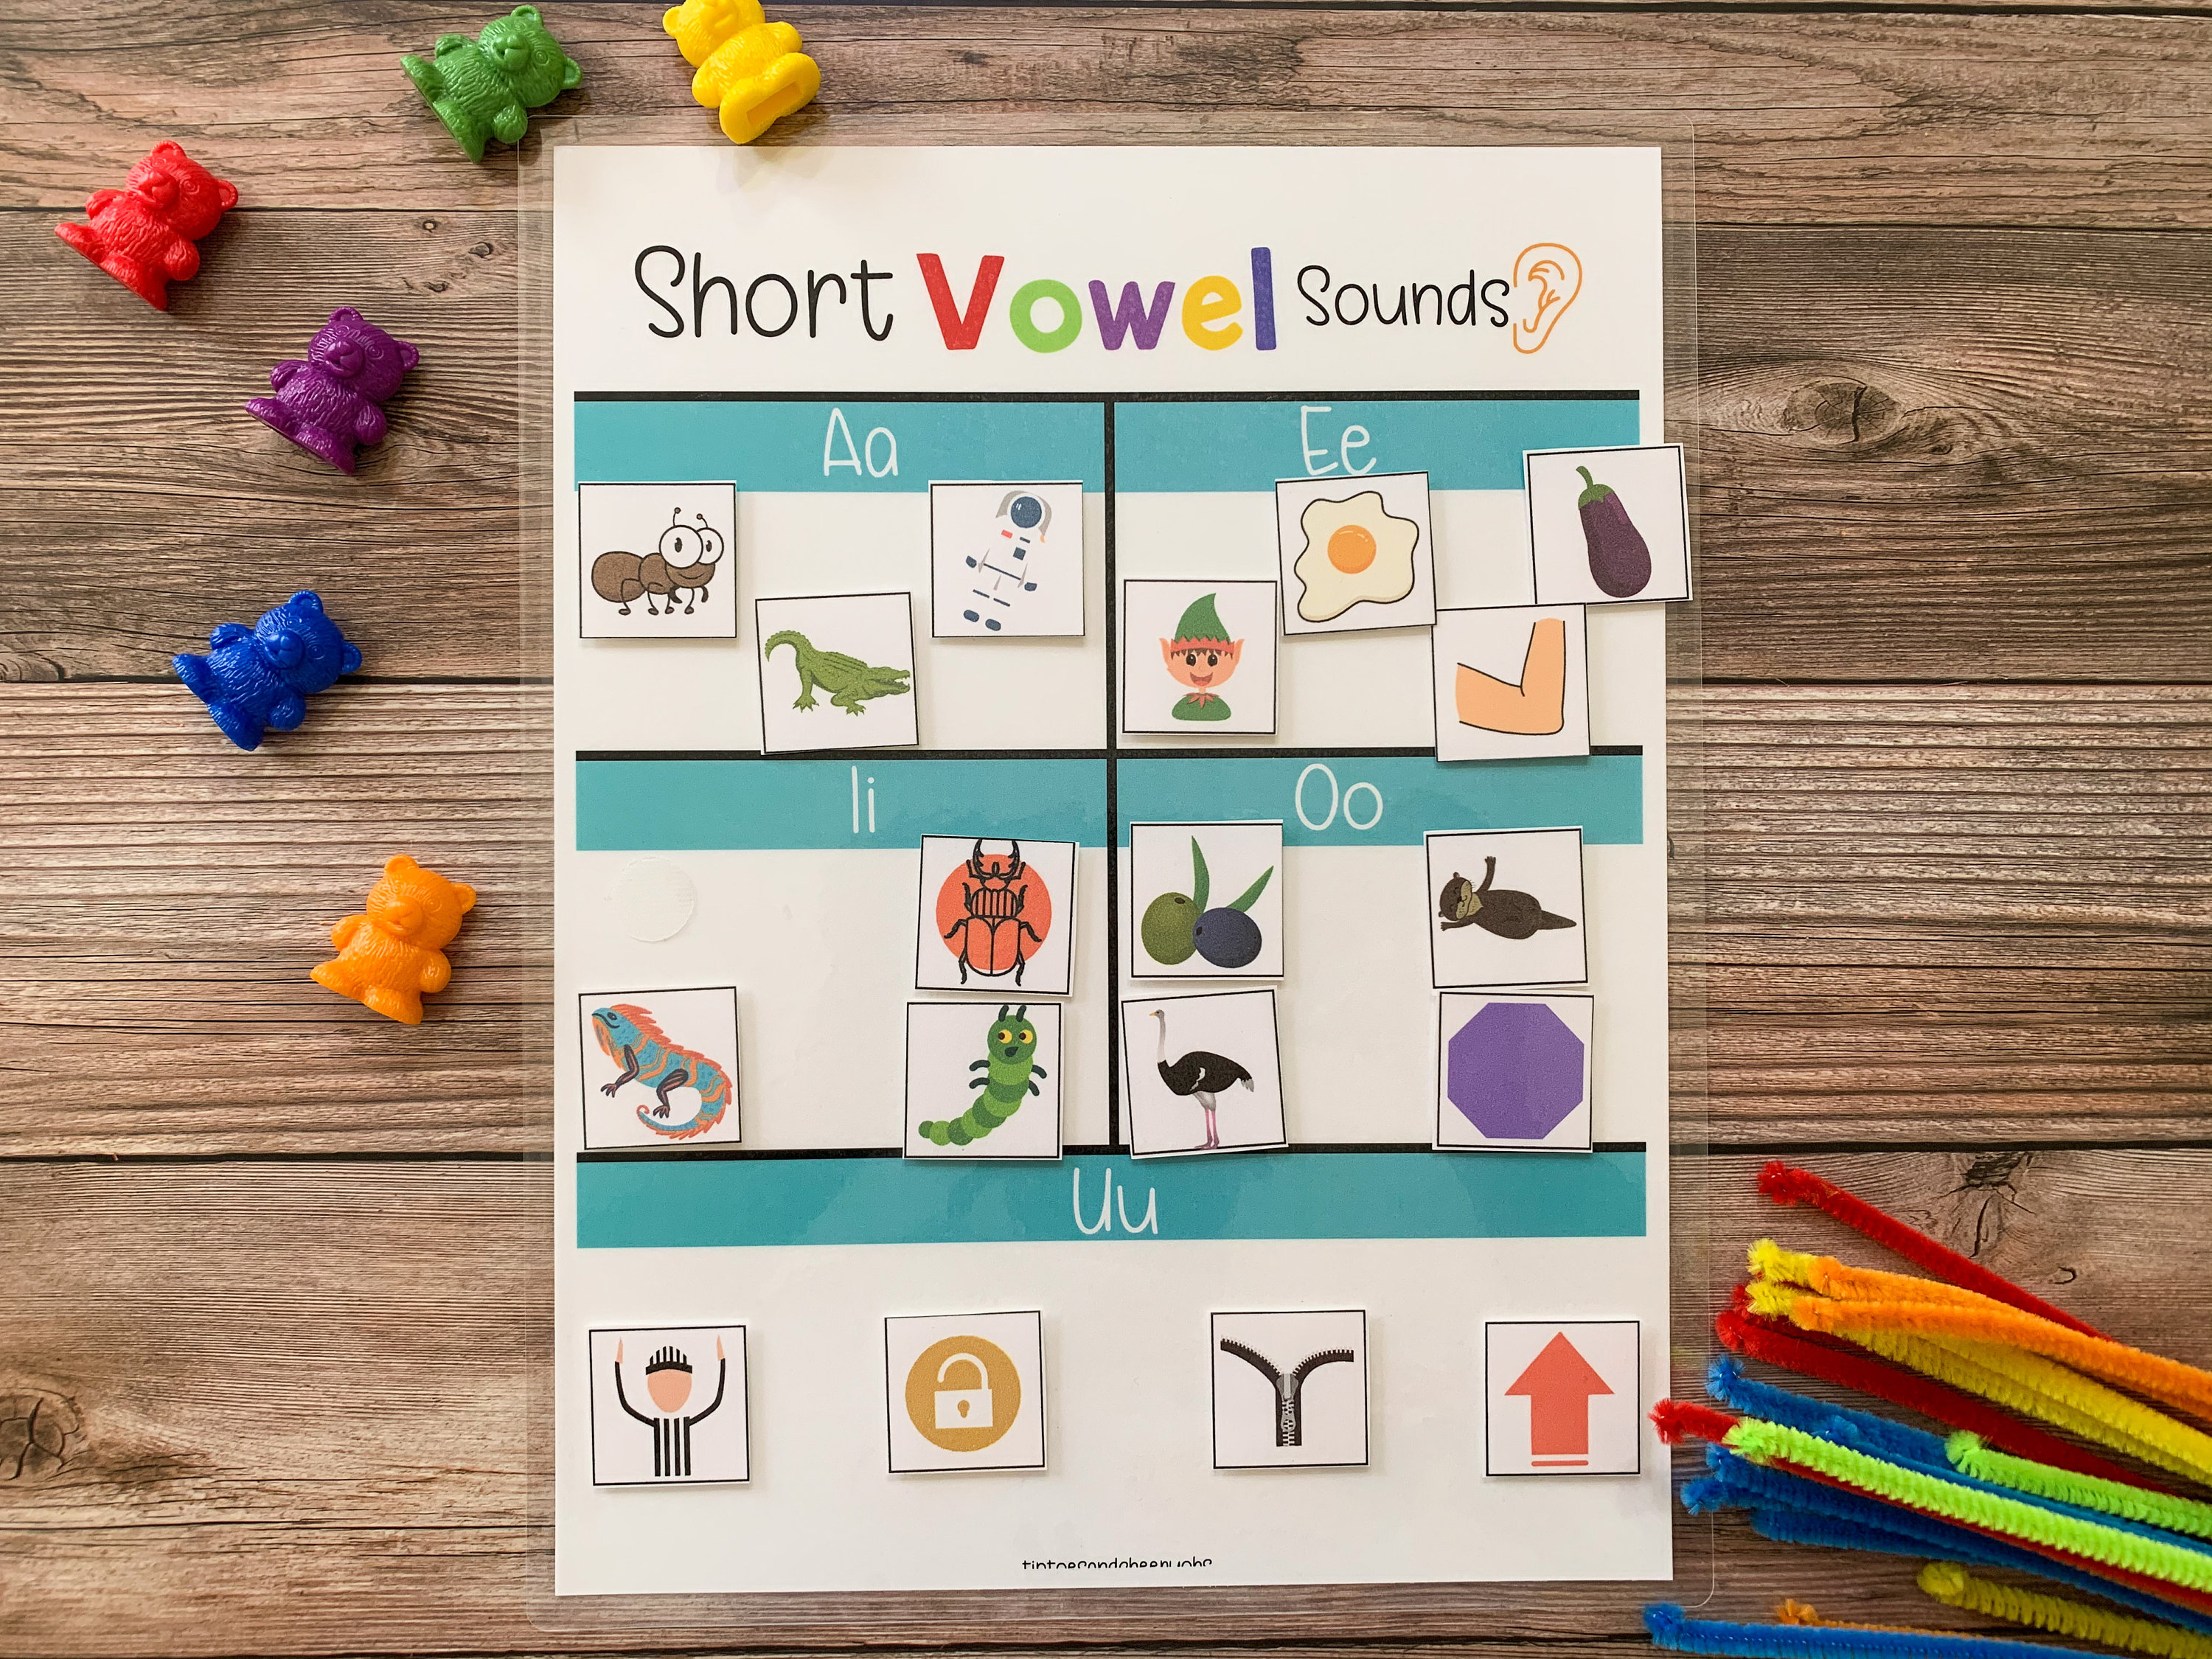 roll-a-short-vowel-games-the-measured-mom-roll-a-short-vowel-games